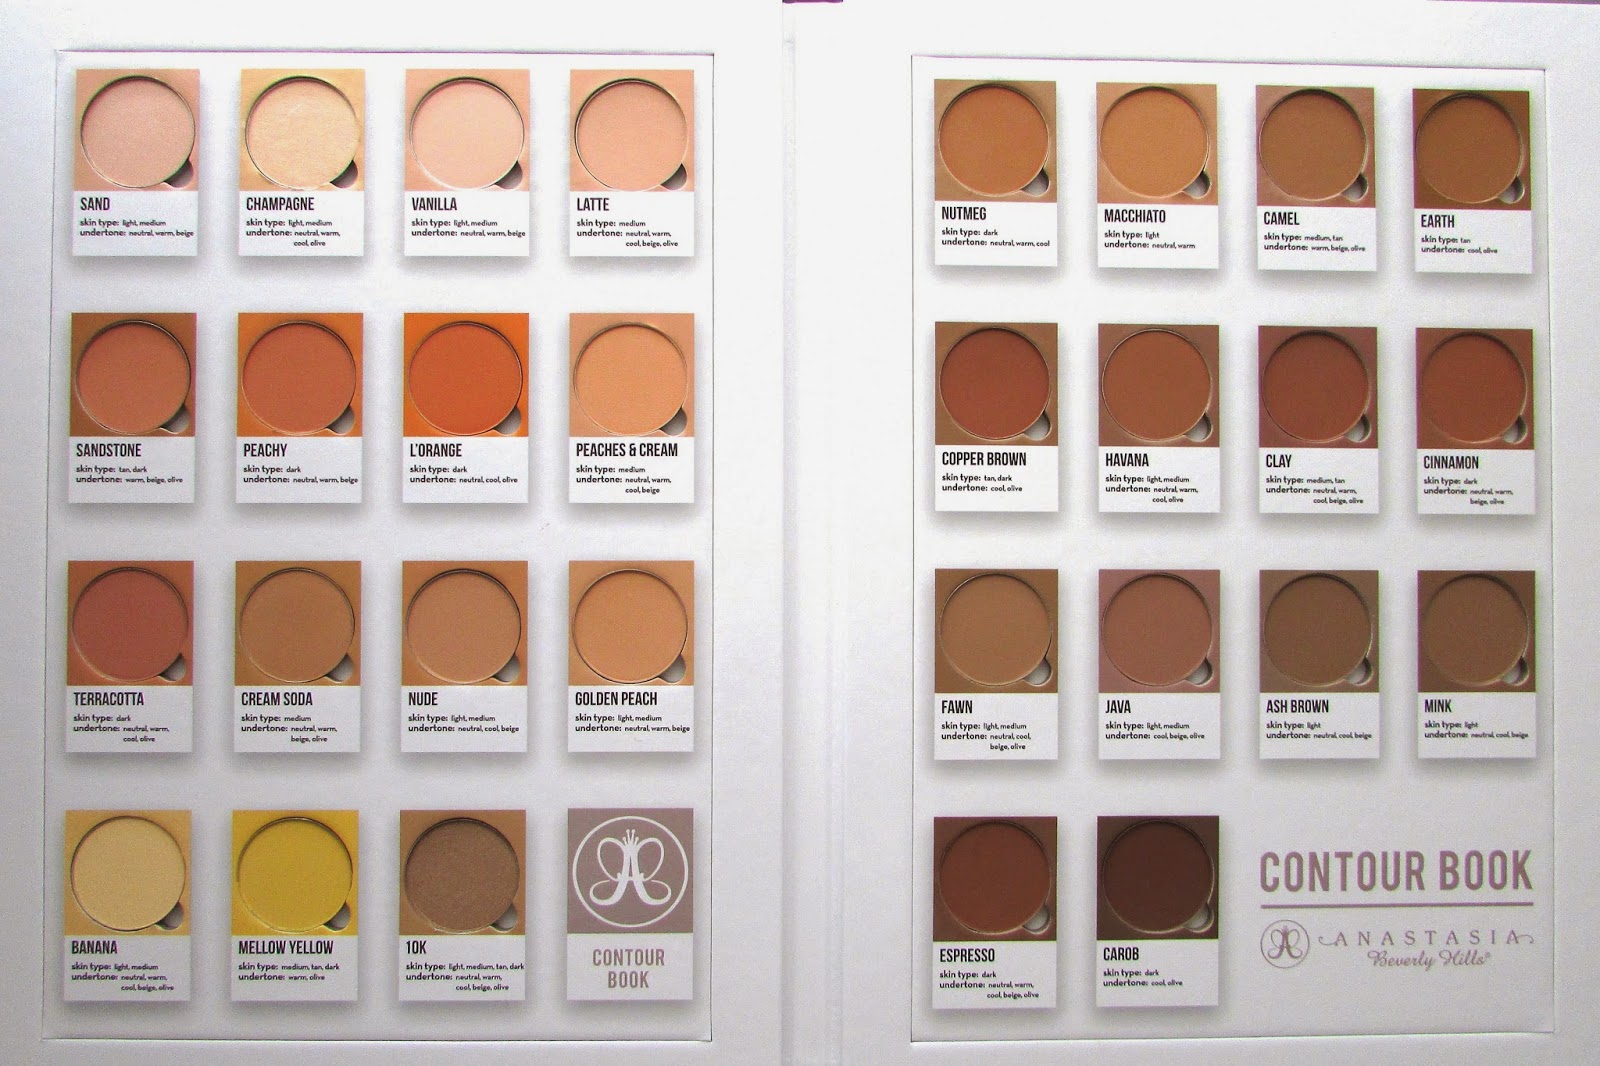 Livv Beautyy: Anastasia Beverly Hills Contour Book Swatches